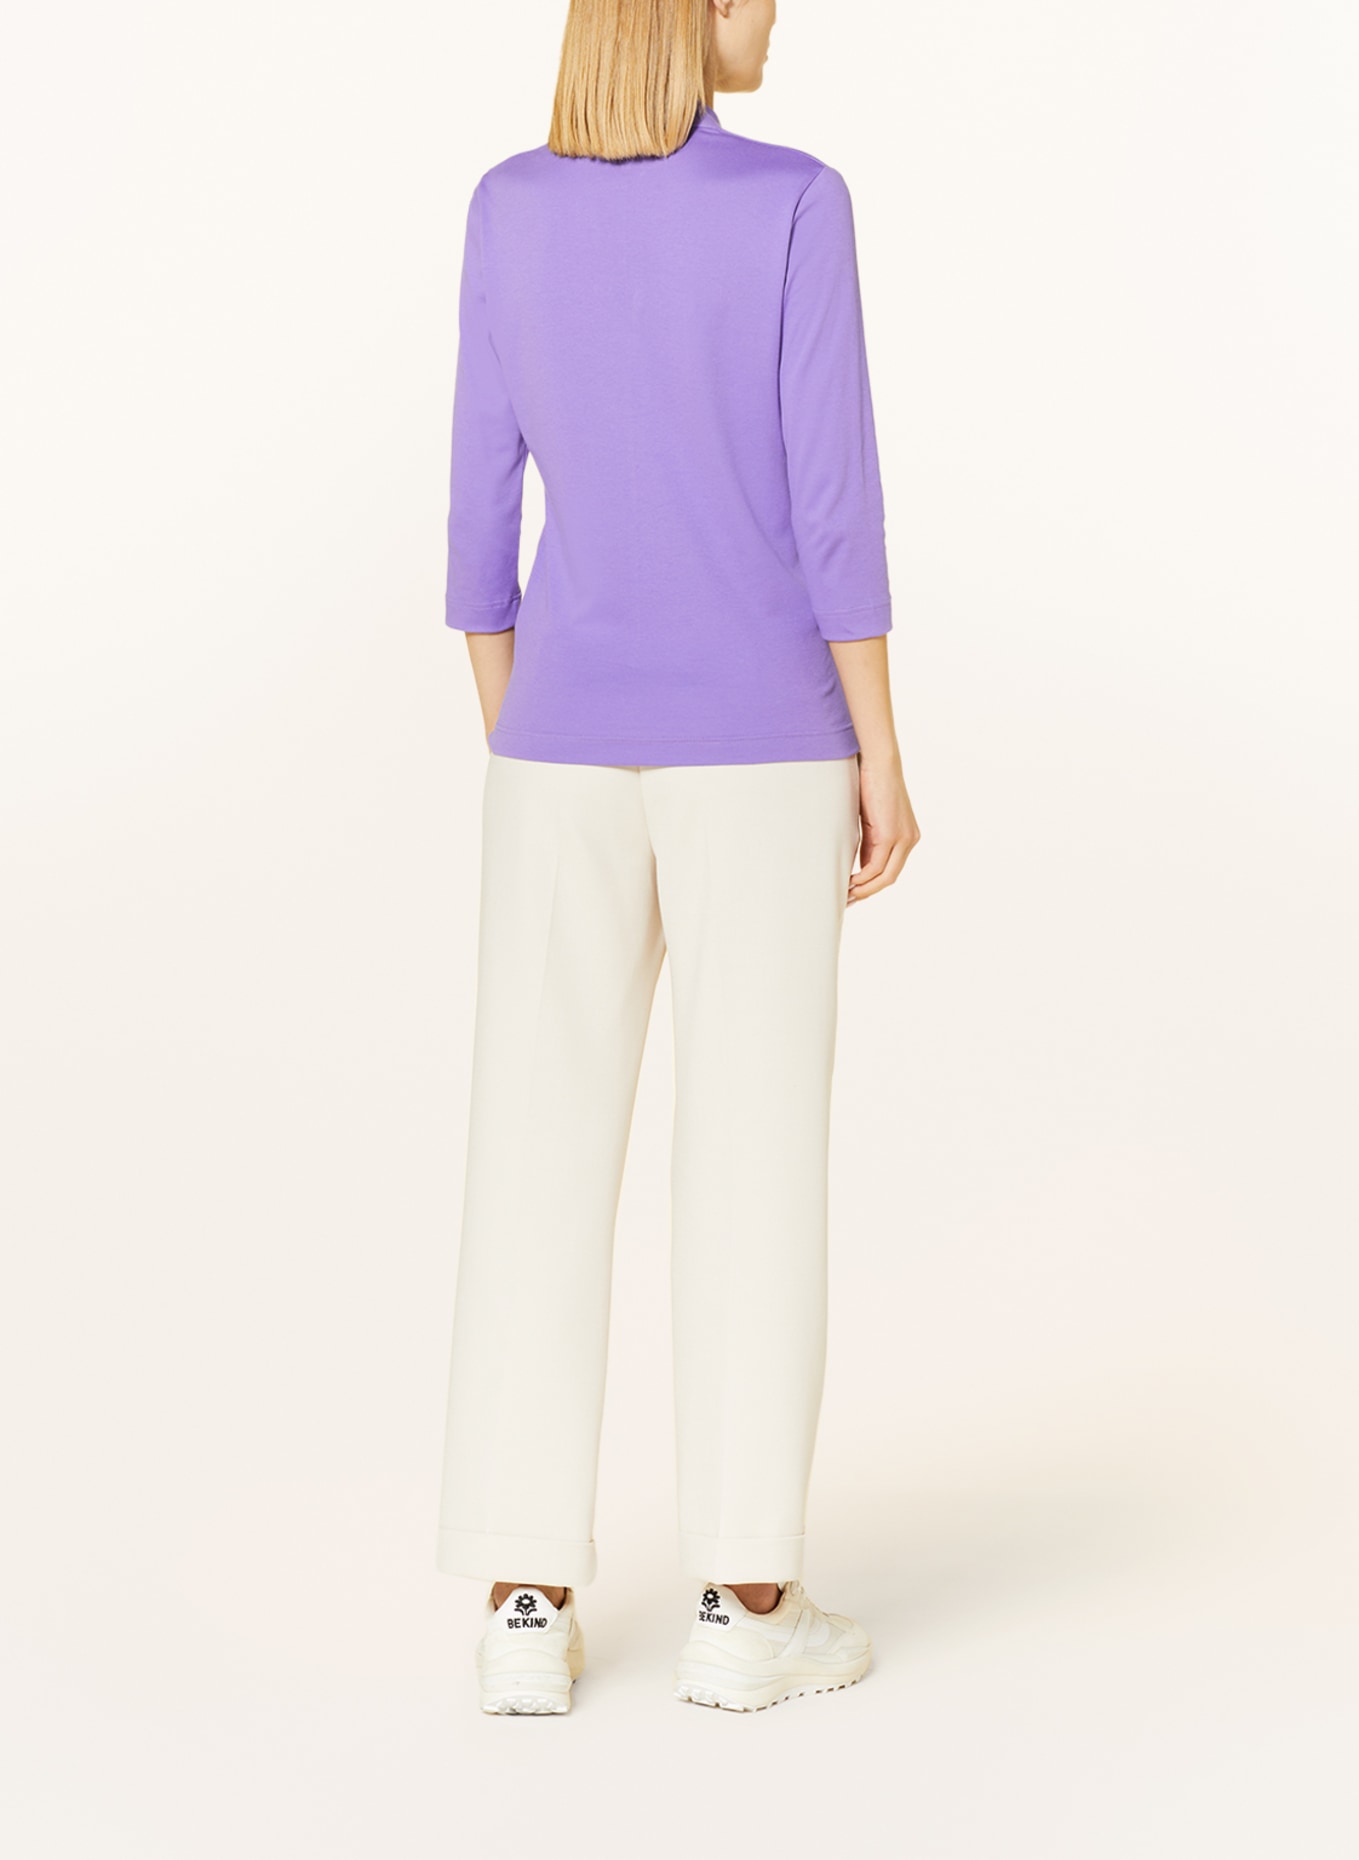 ZAÍDA Shirt with 3/4 sleeves, Color: PURPLE (Image 3)